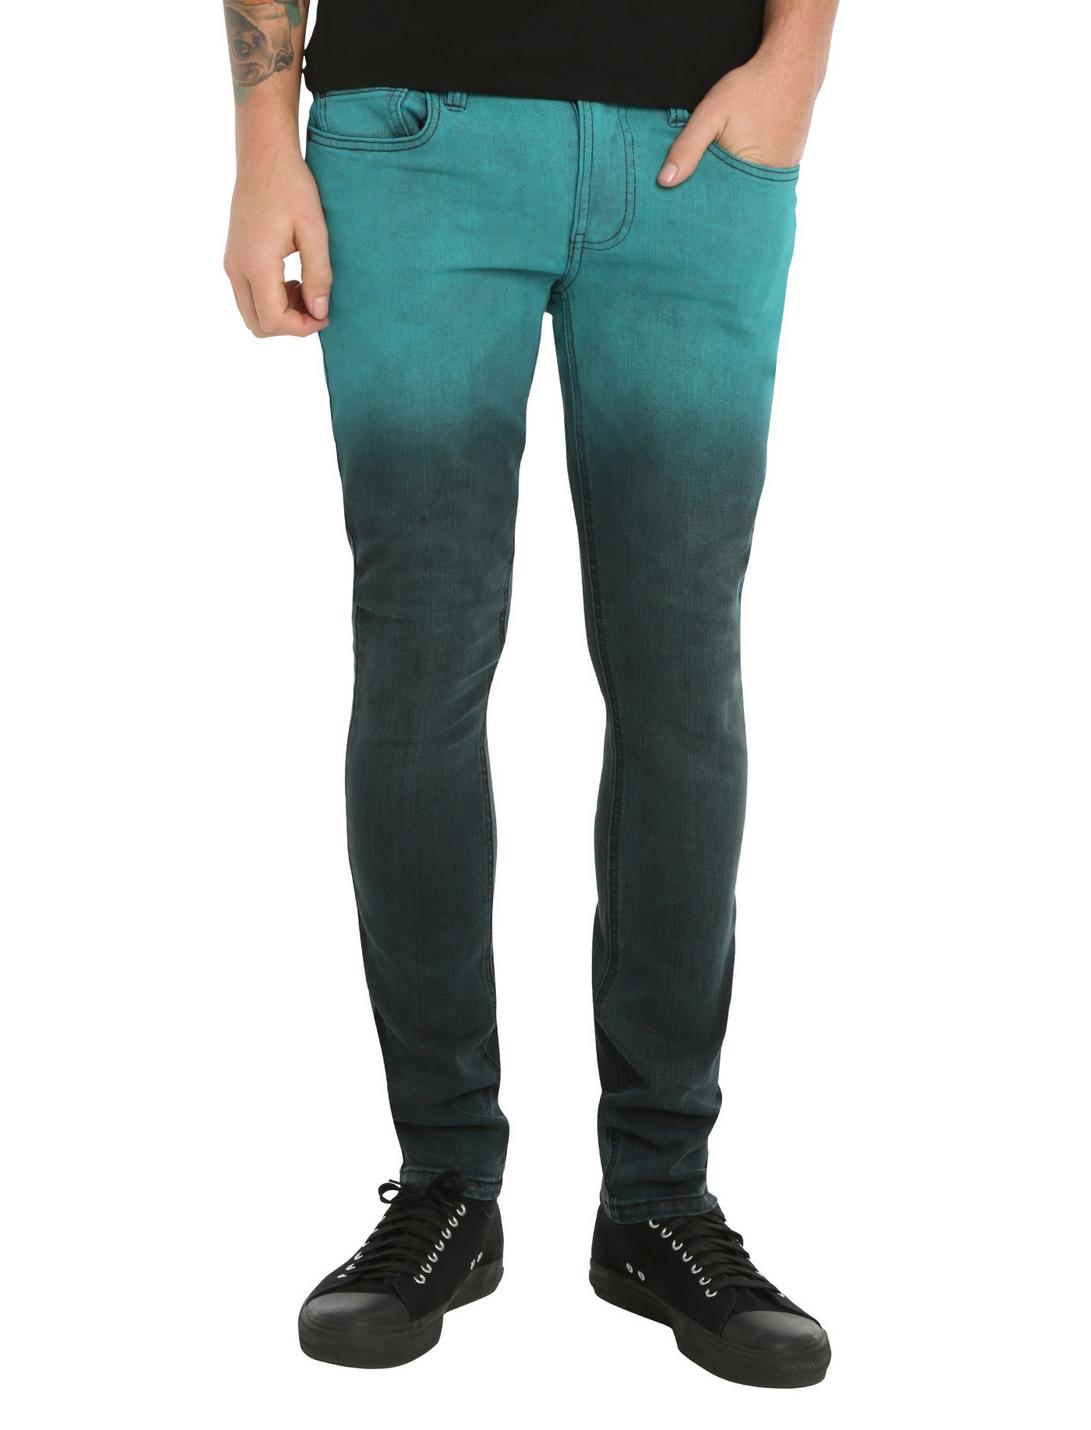 RUDE Teal Ombre Skinny Jeans, , hi-res